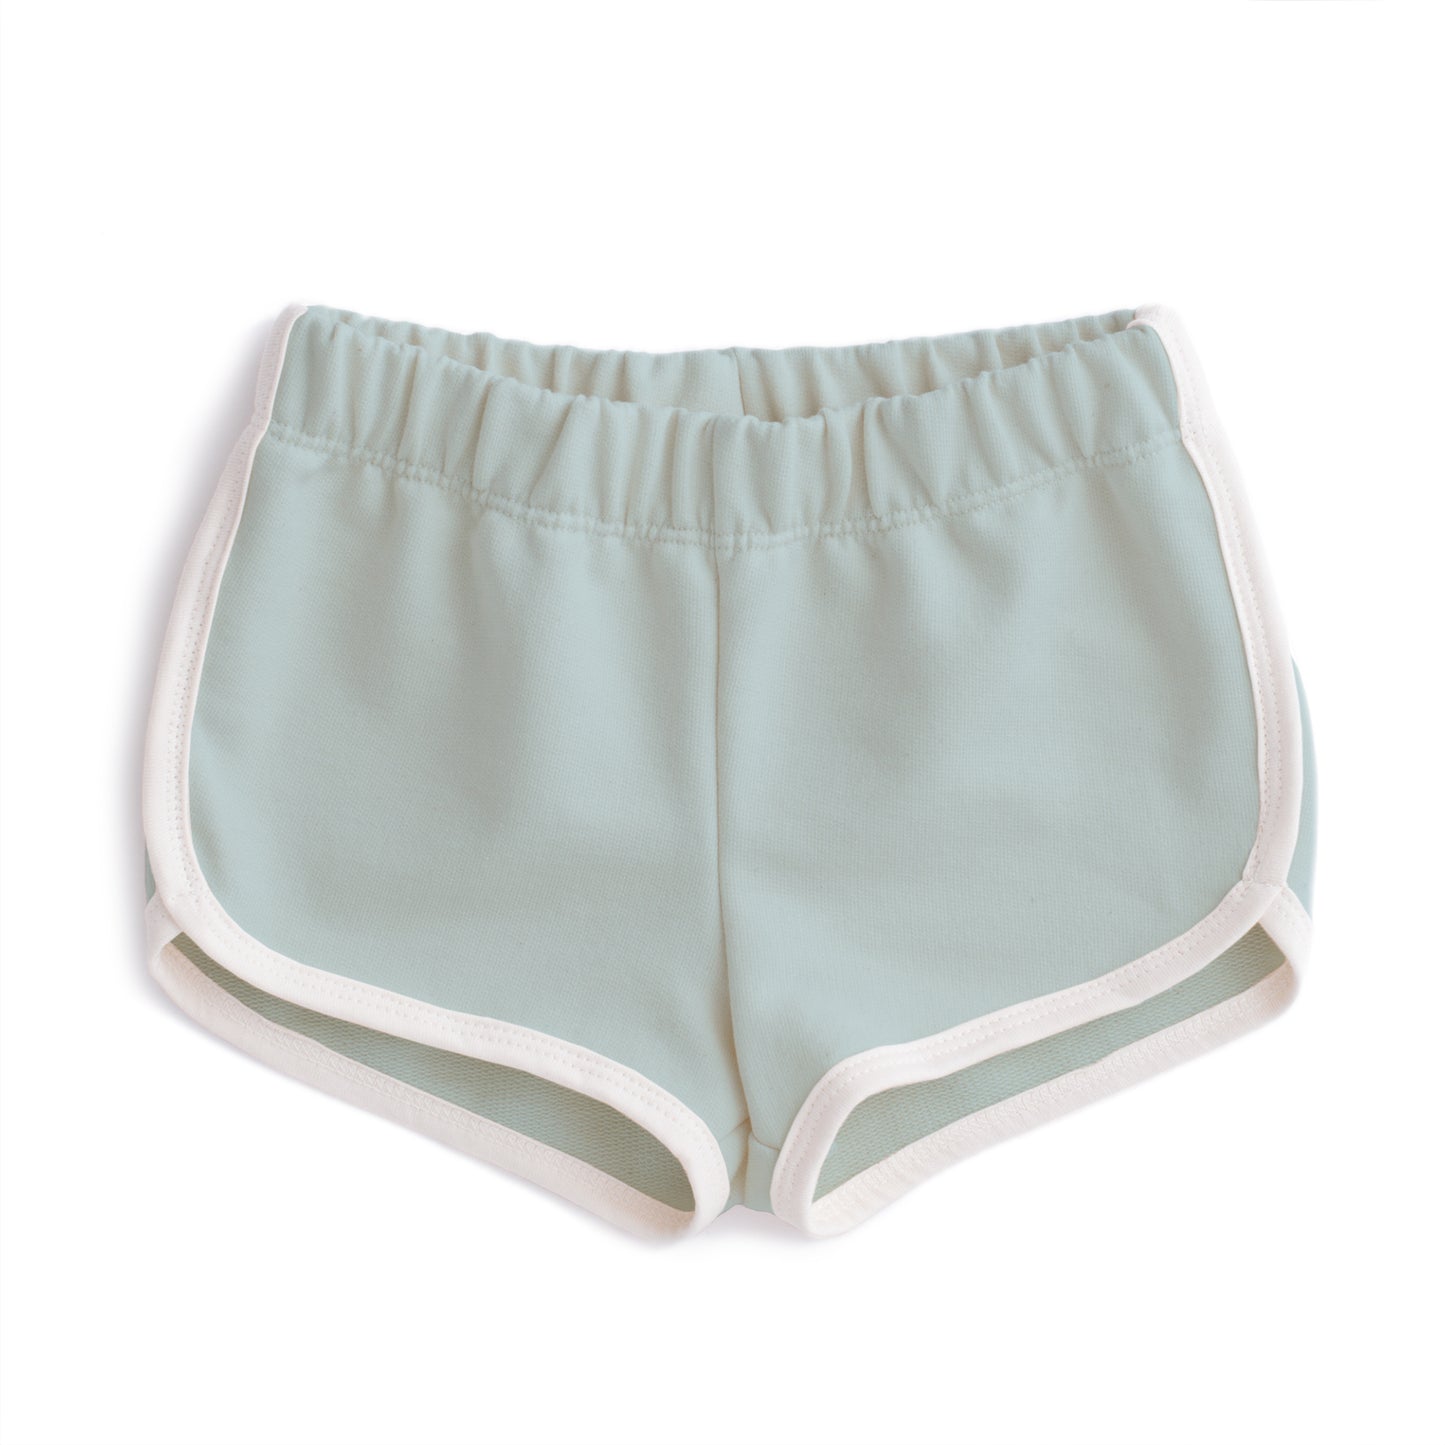 French Terry Shorts - Solid Pale Blue